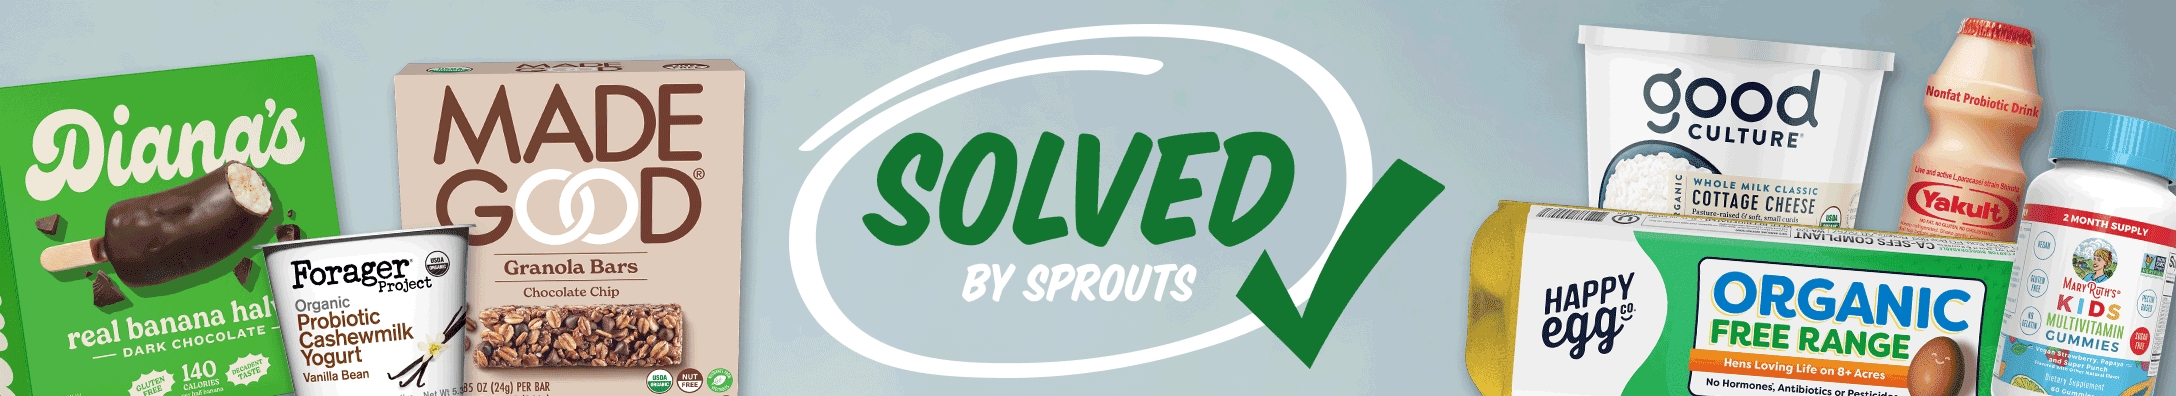 Solved by Sprouts logo surrounded by foods that promote wellness